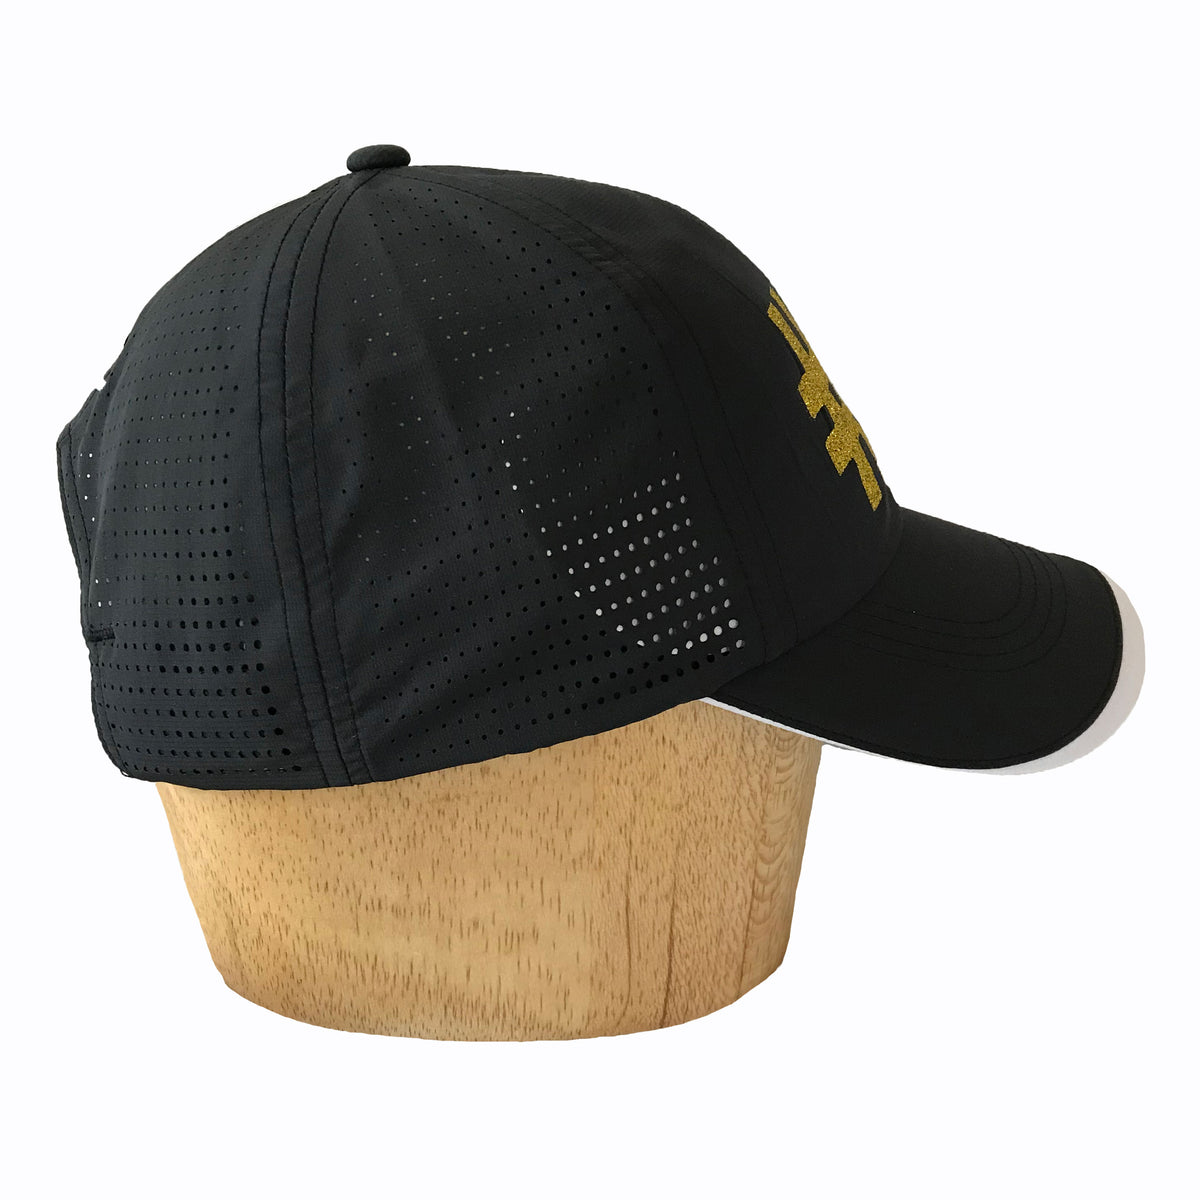 Nike performance Cap with sparkly gold logo